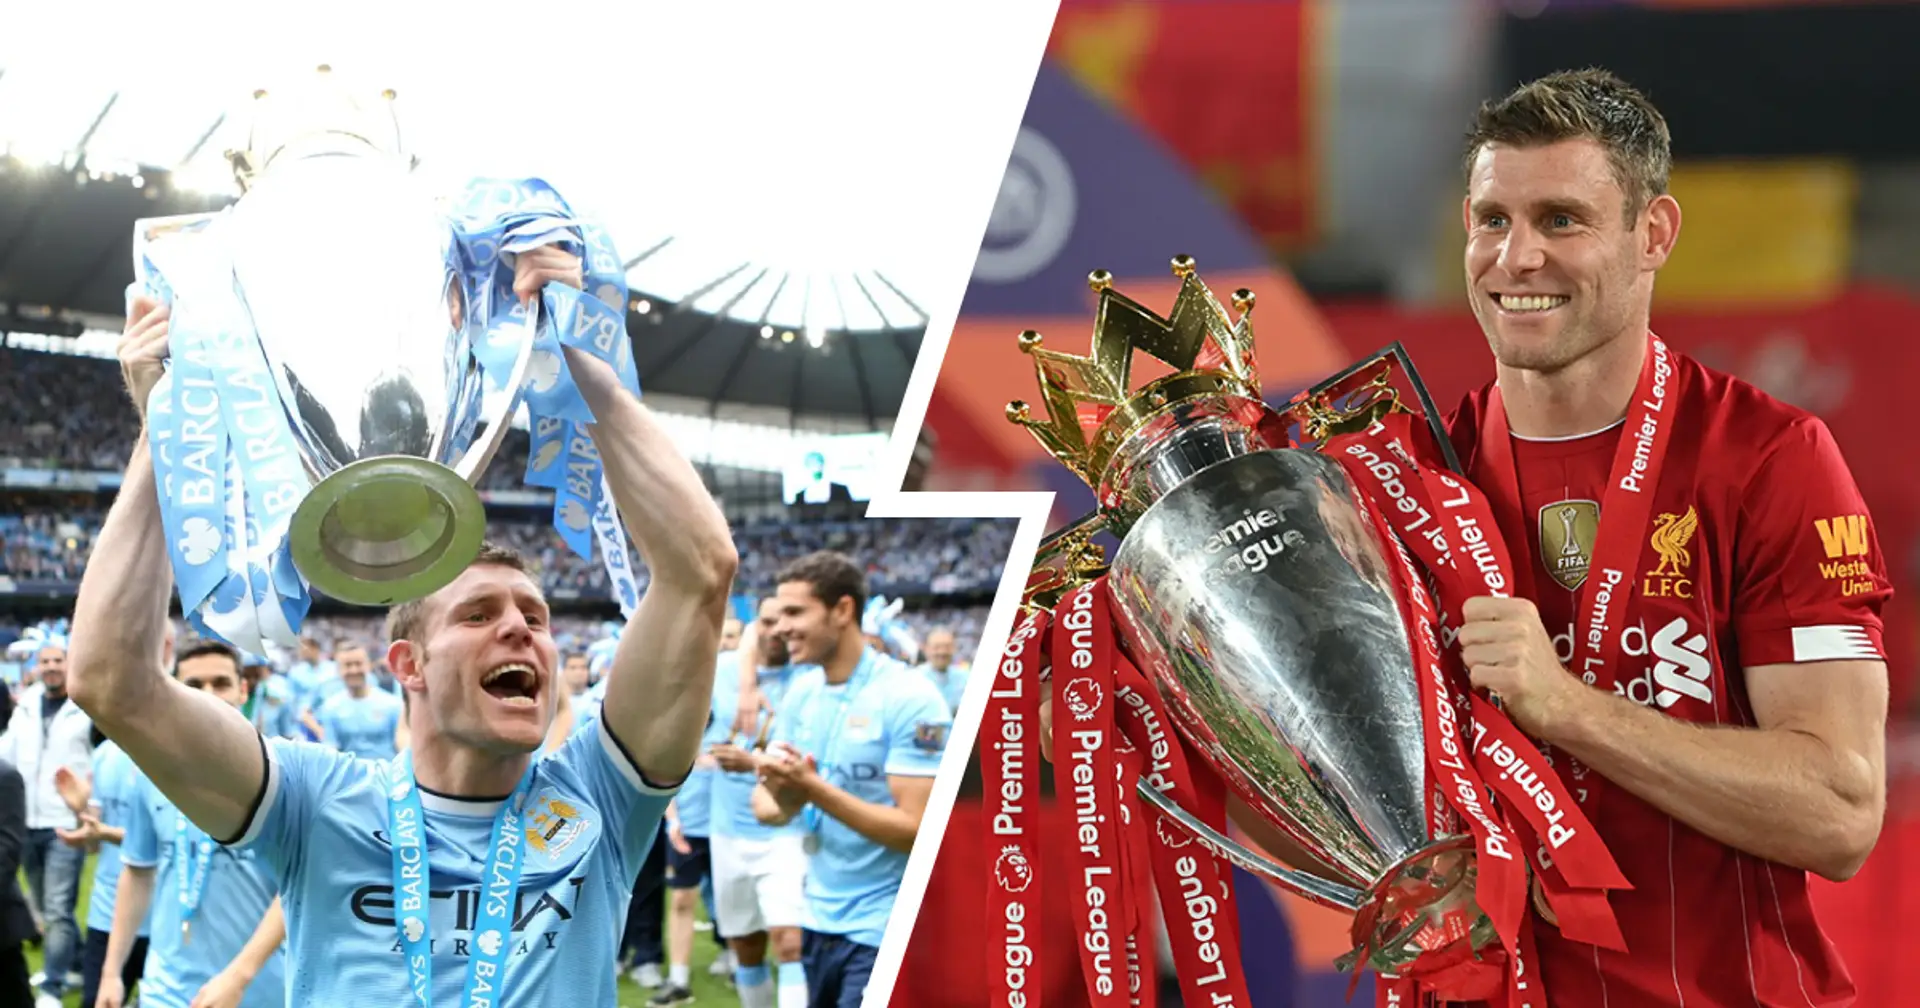 James Milner becomes 11th player to win Premier League with 2 different clubs